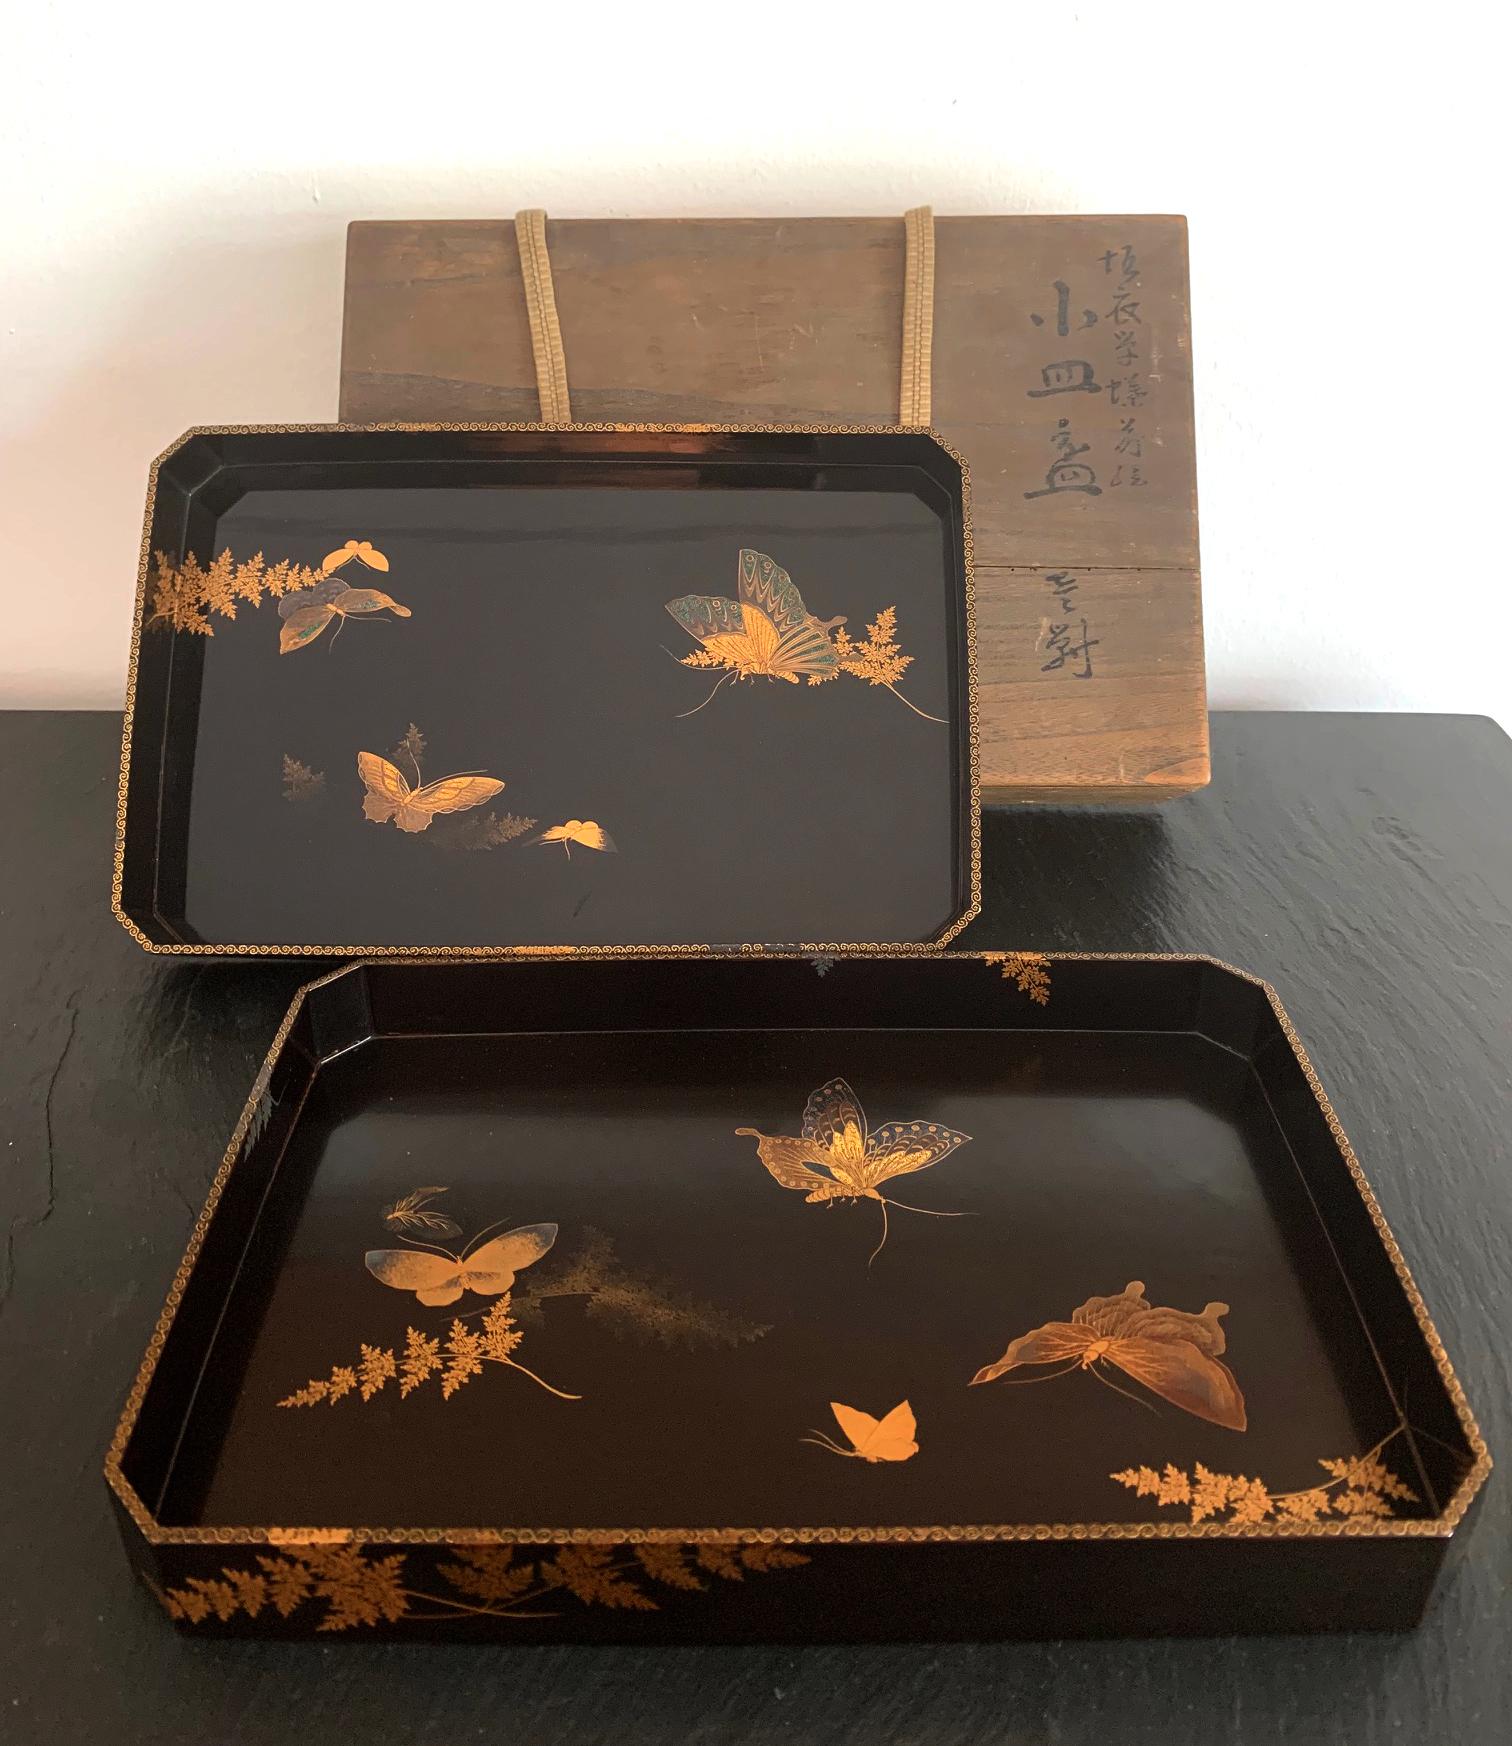 A set of two Japanese lacquer trays in gradual fitting size, circa 1850s-1960s late Edo period. The trays were superbly decorated with butterflies flying among autumn grasses, using both Hiramaki-e and Togidashi maki-e techniques to create a